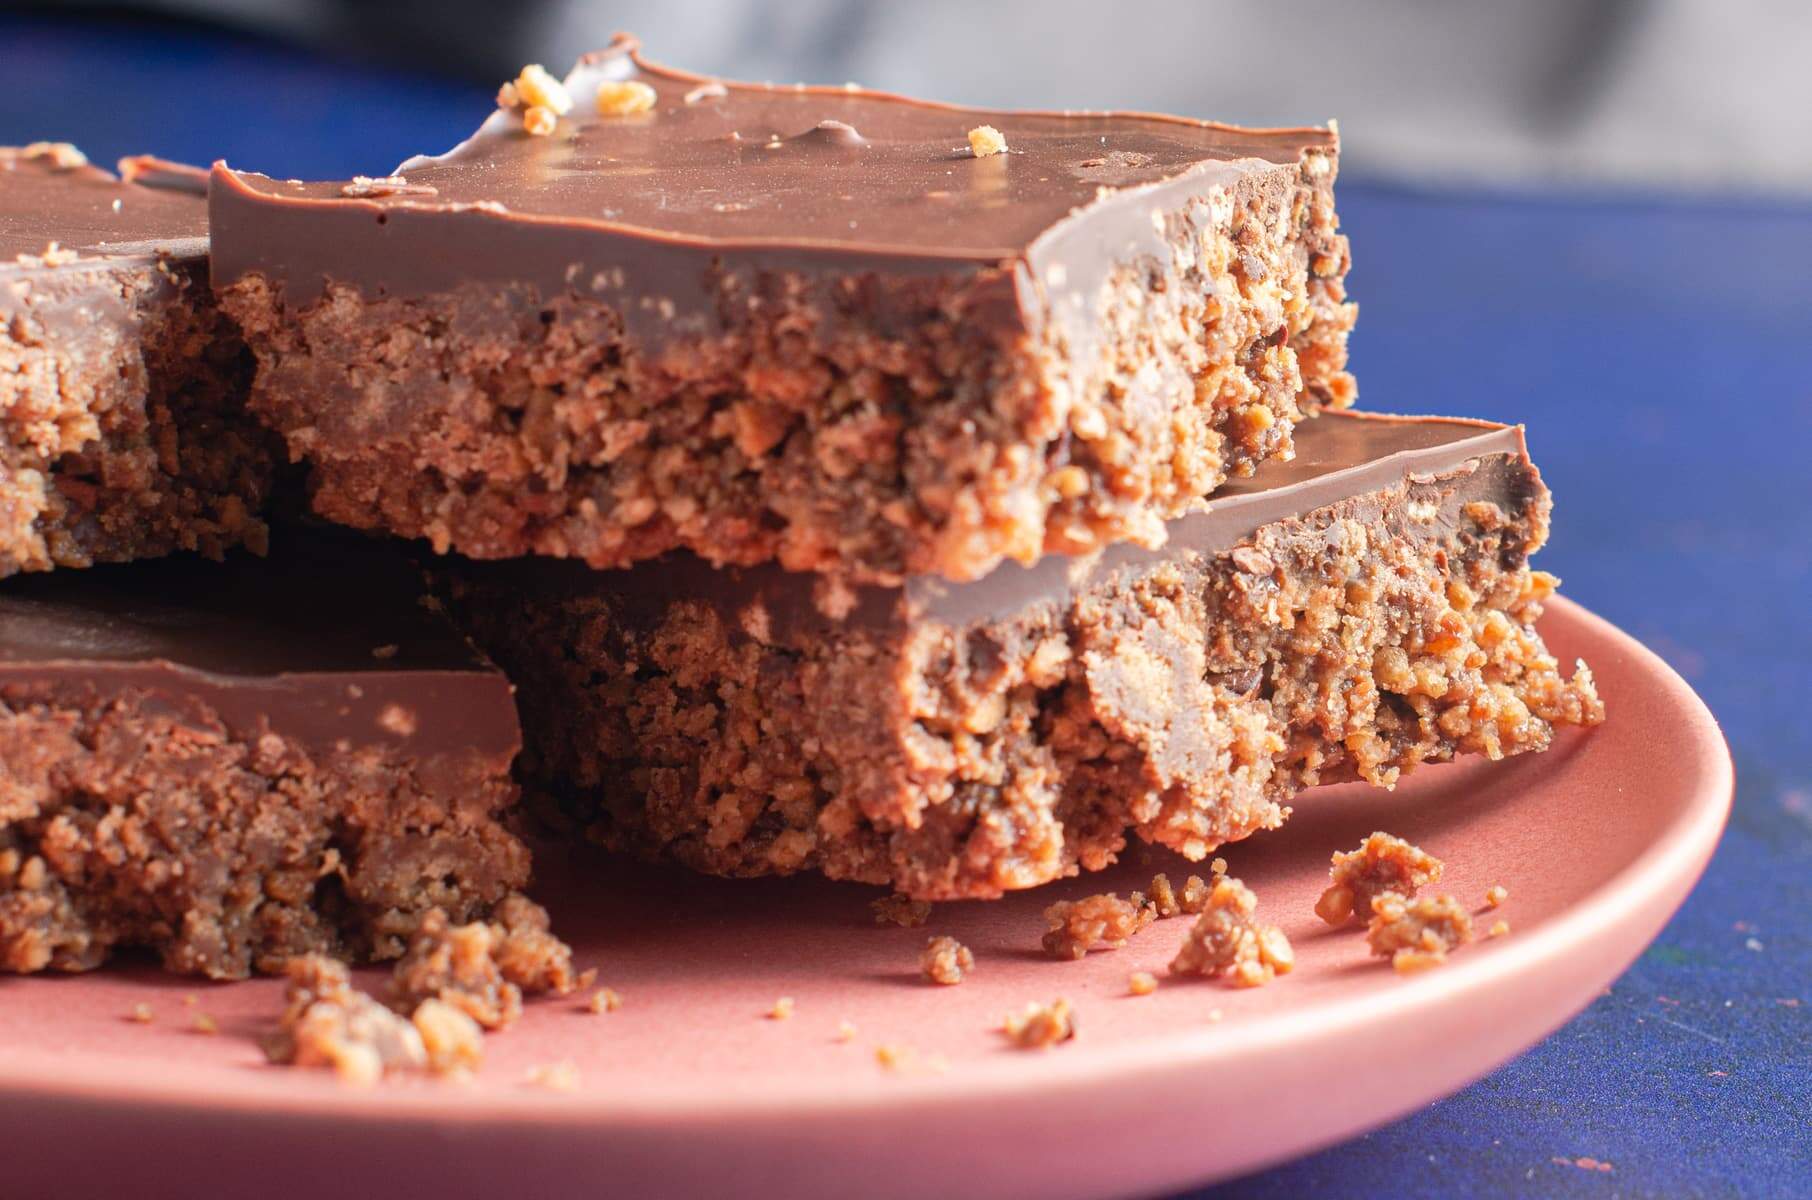 4 squares of crumbly no bake chocolate tiffin digestive traybake sat on a salmon pink coloured plate, crumbs scattered and a dark blue backgroiund